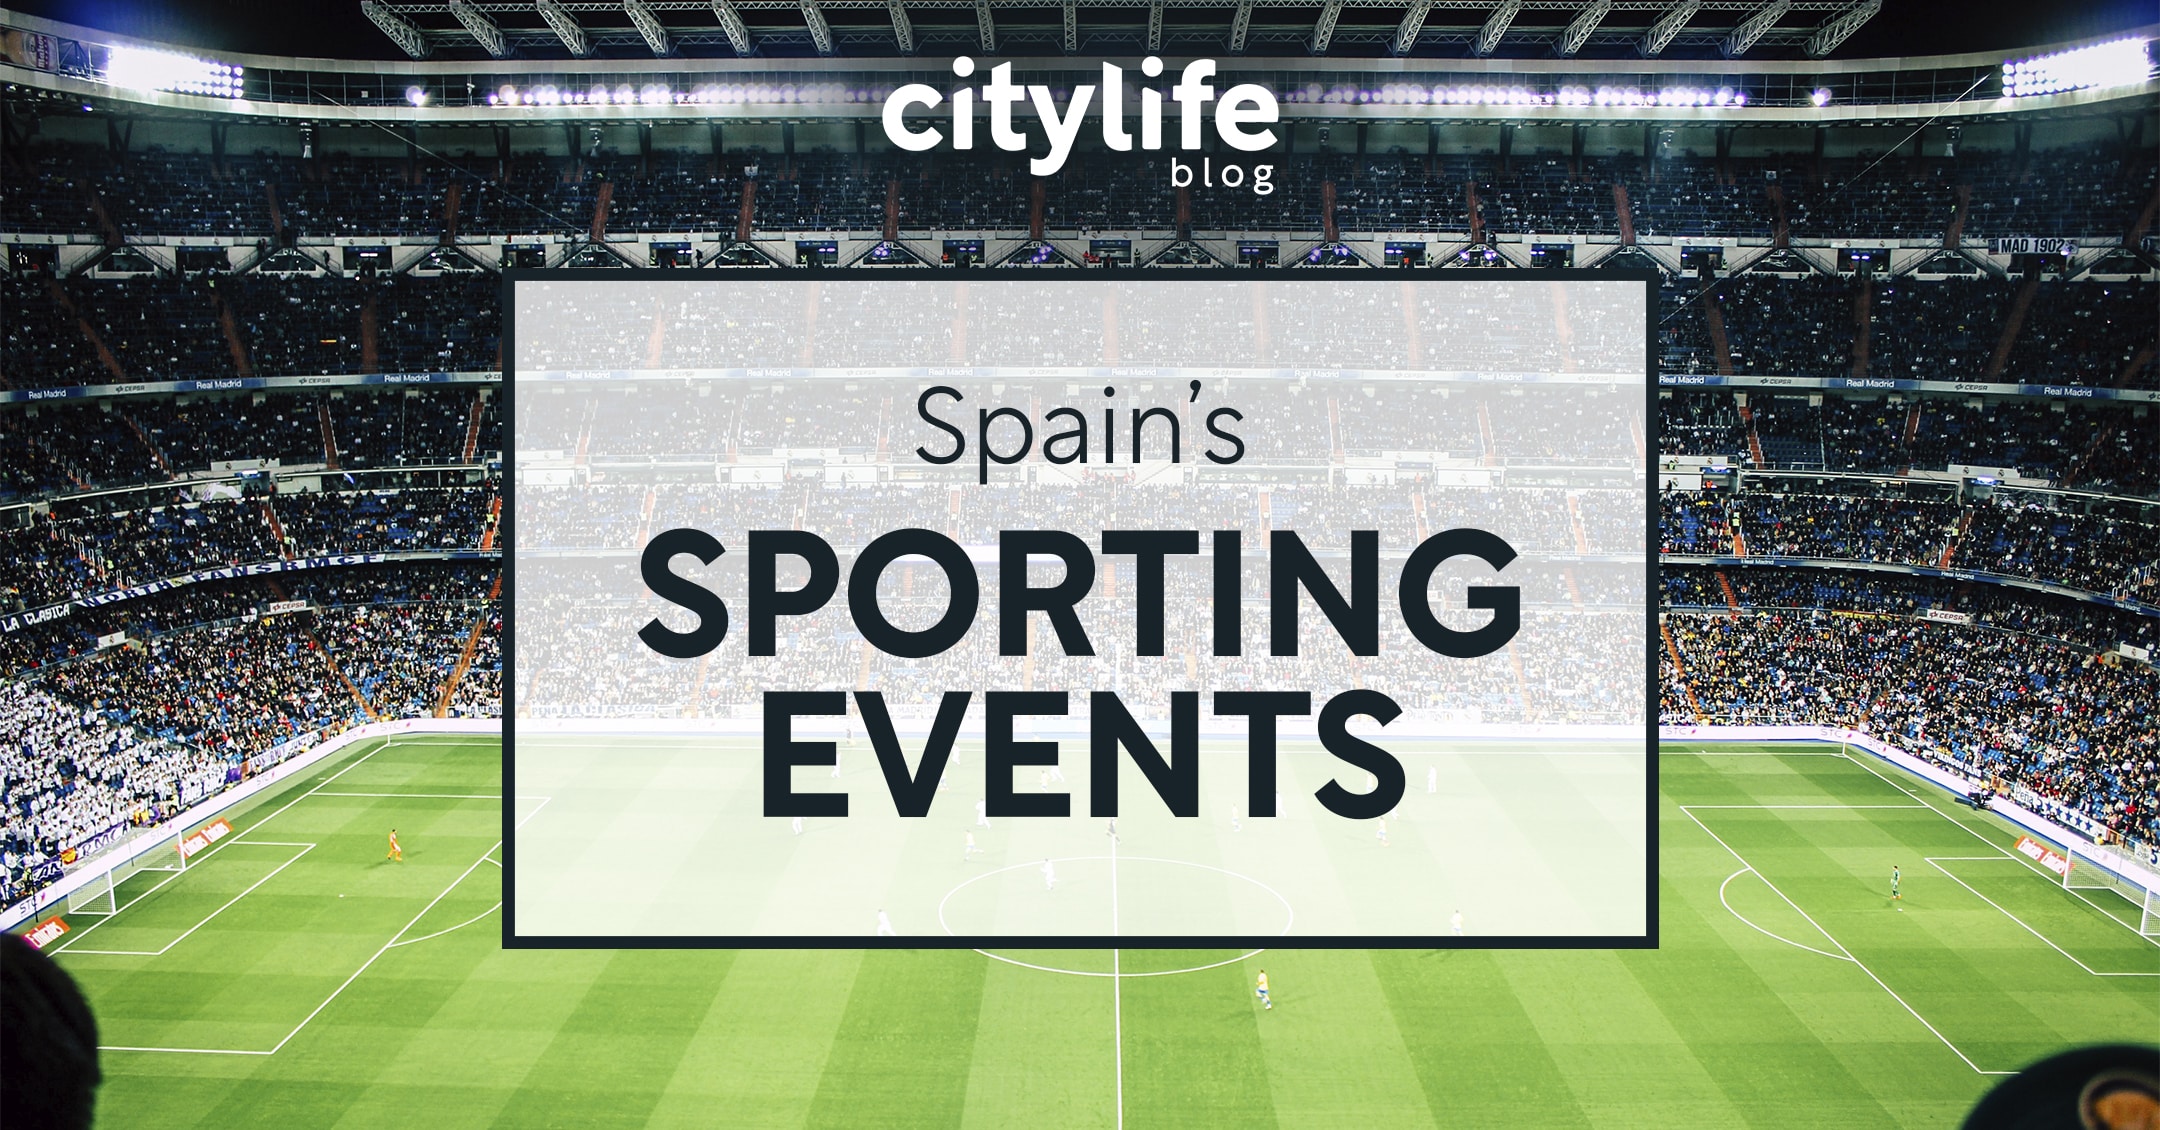 featured-image-spain-sporting-events-citylife-madrid